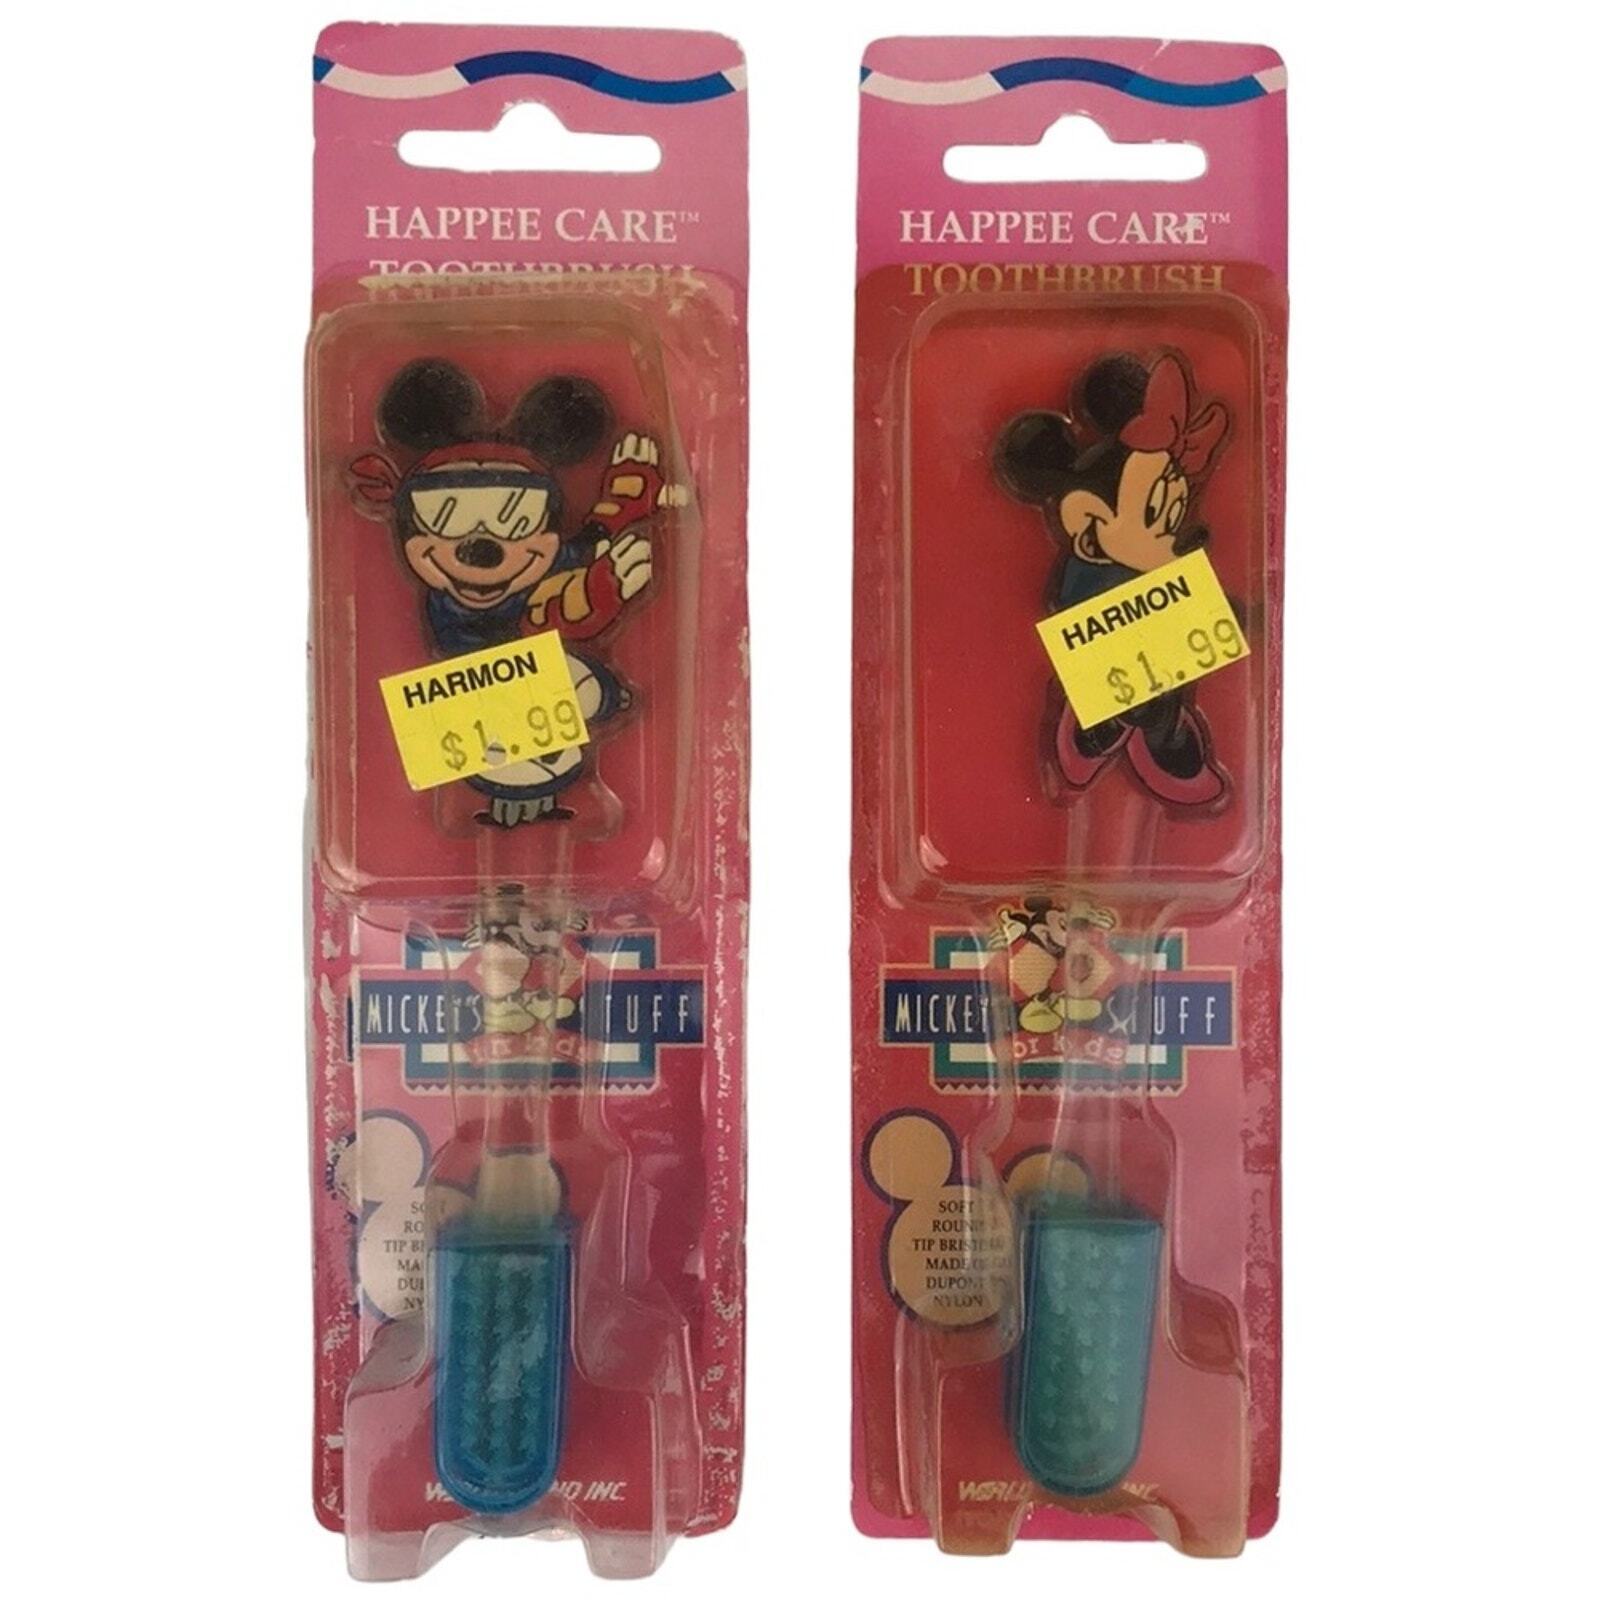 Vtg NOS Disney Mickey\'s Stuff Mickey and Minnie Mouse Happee Care Toothbrushes